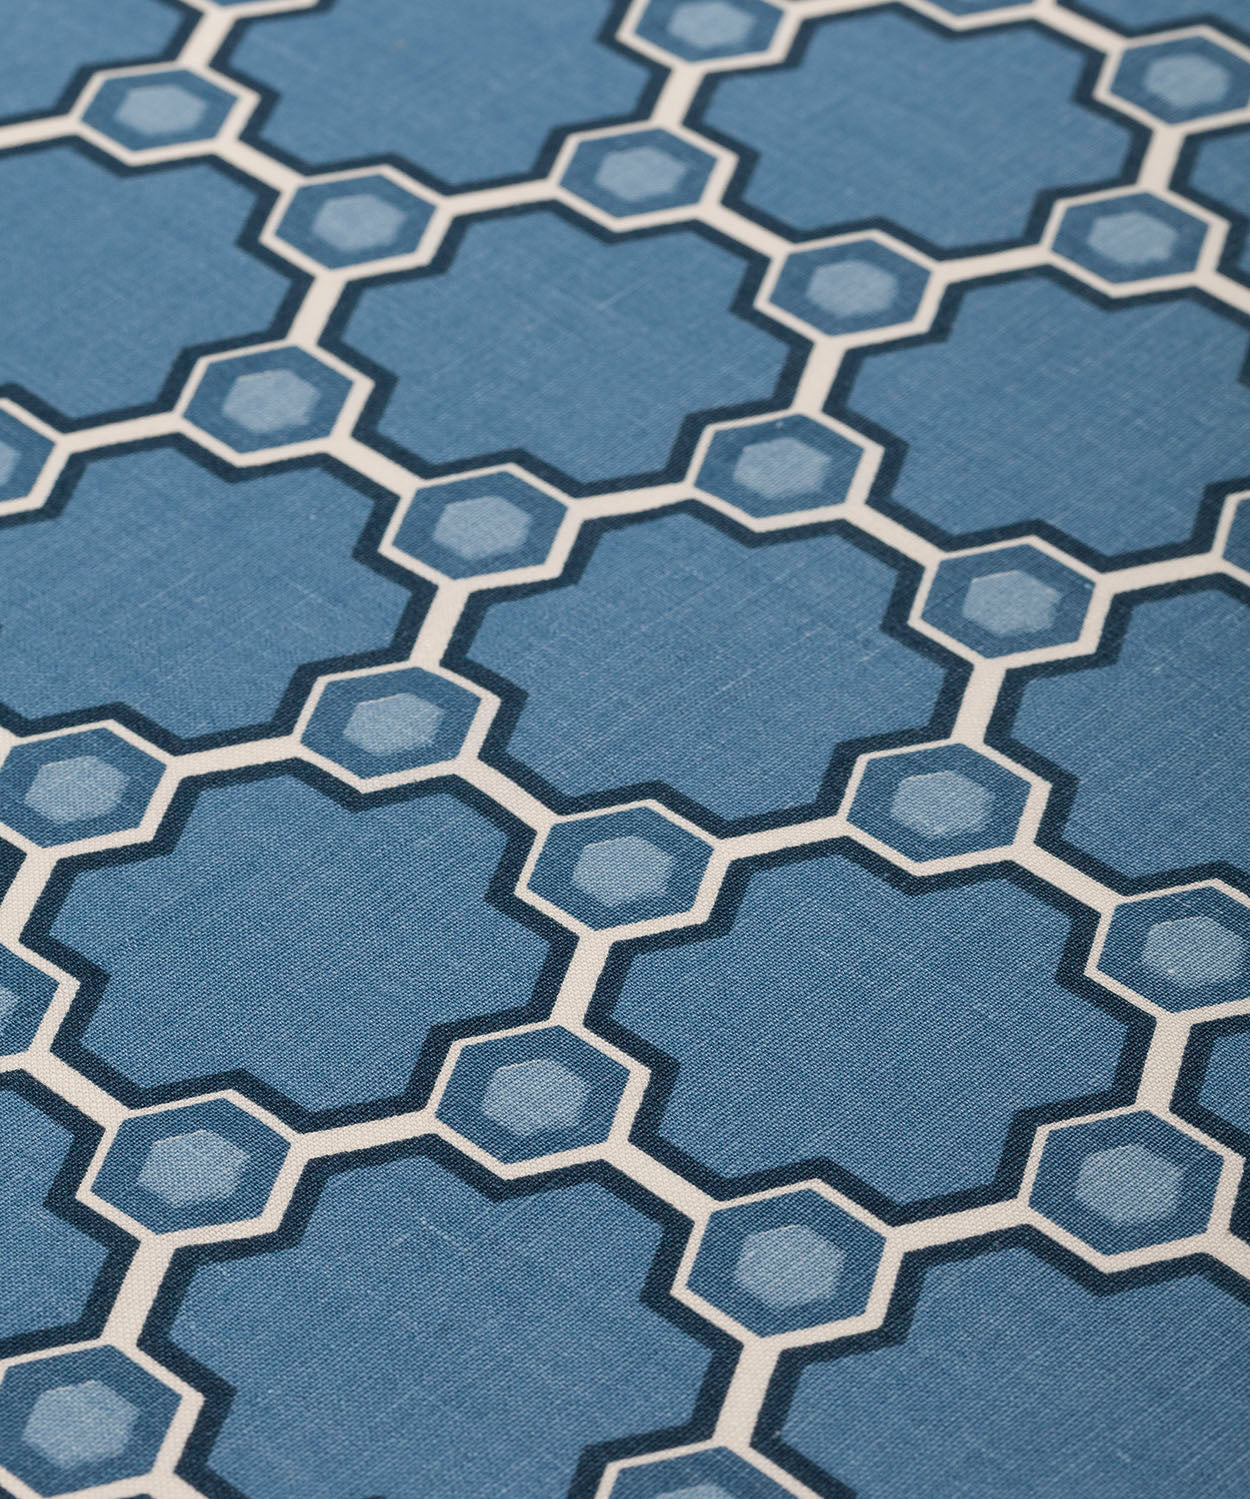 Fabric yardage in a geometric honeycomb pattern in shades of blue, cream and charcoal.